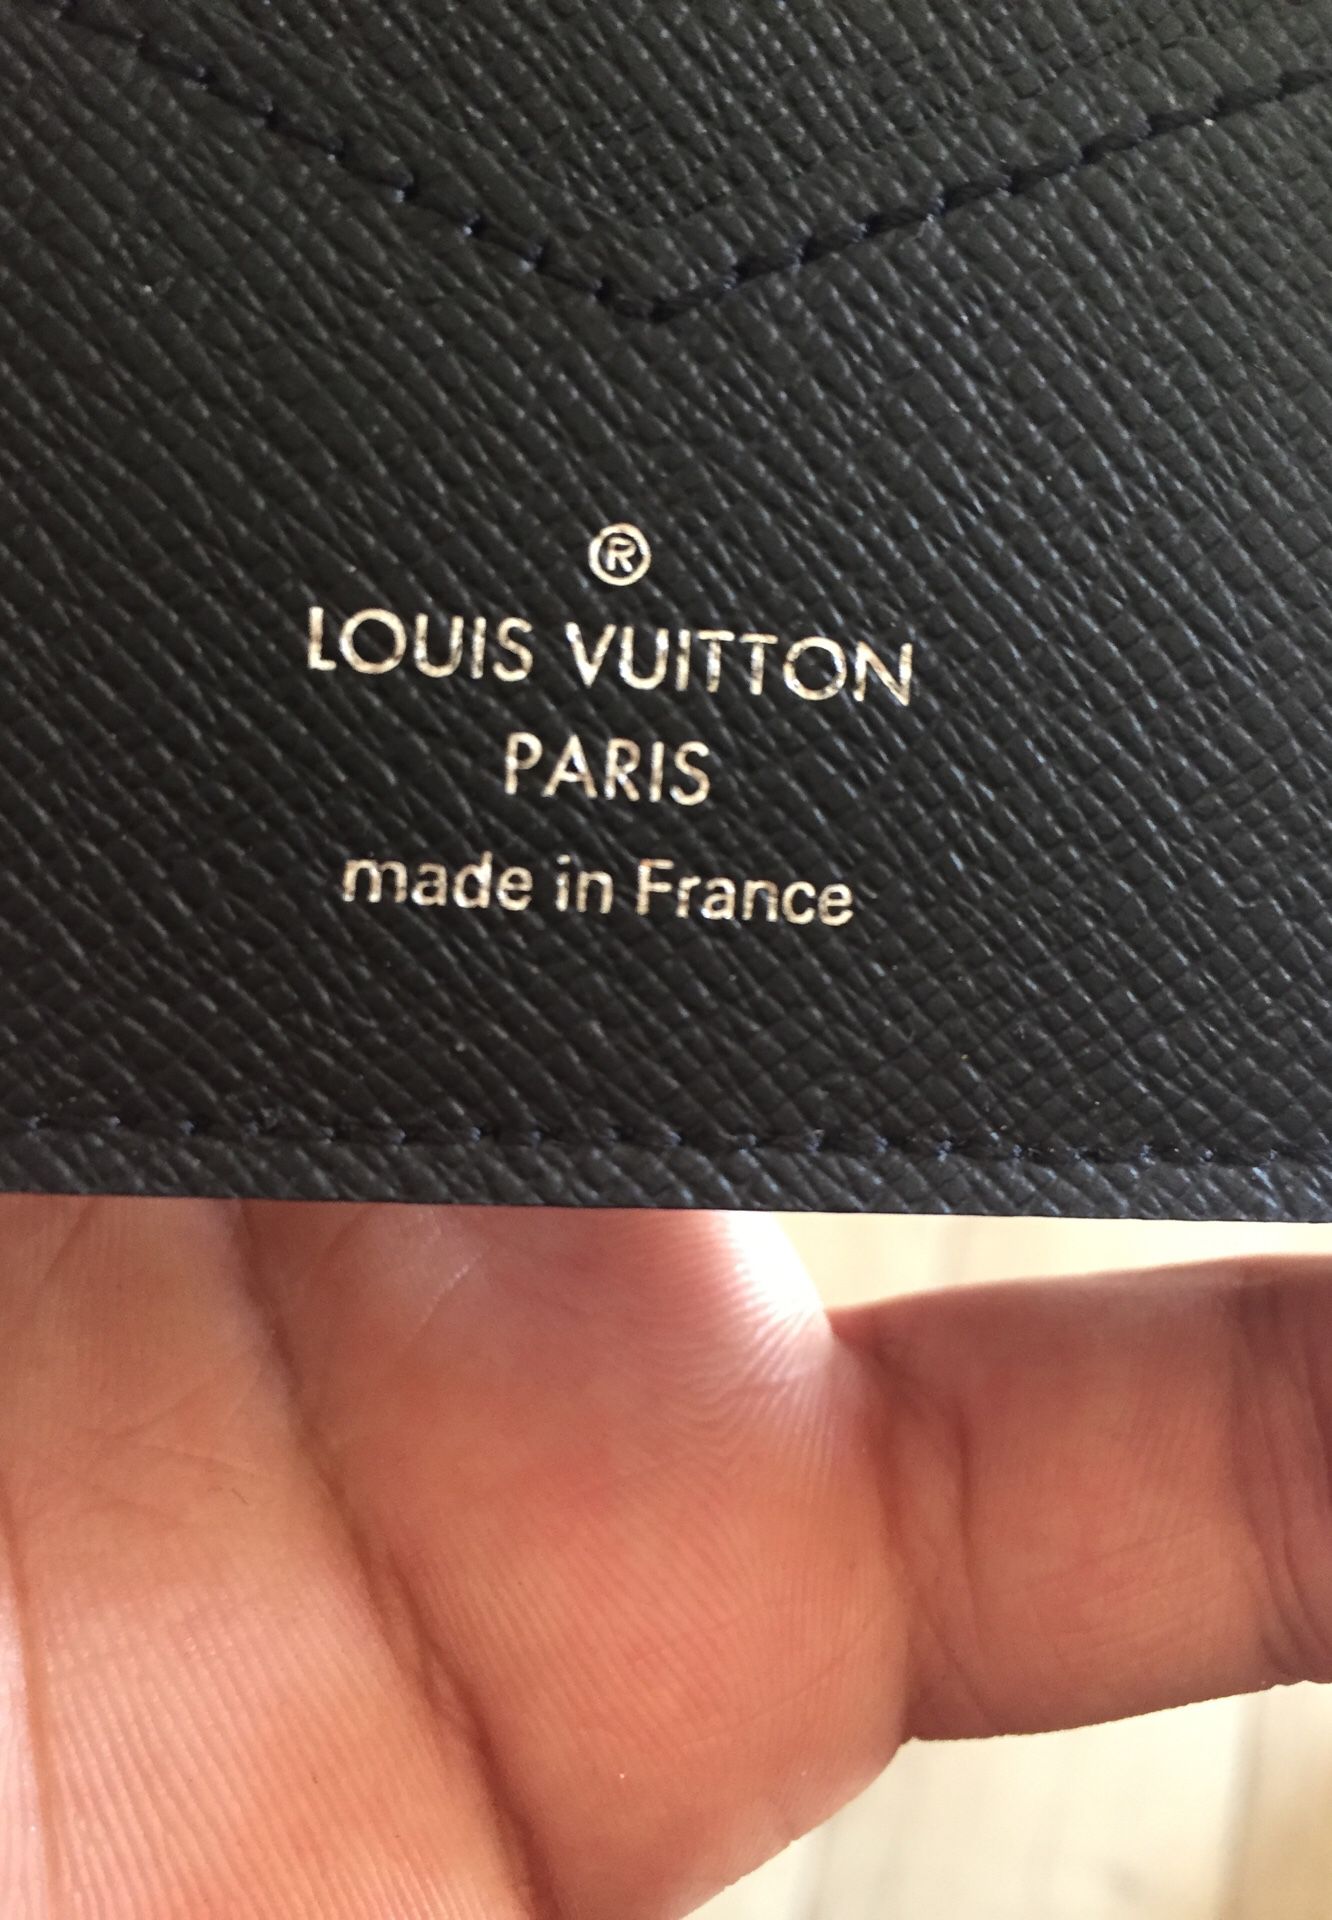 Louis Vuitton Wallet Cruise Ship Edition for Sale in Houston, TX - OfferUp